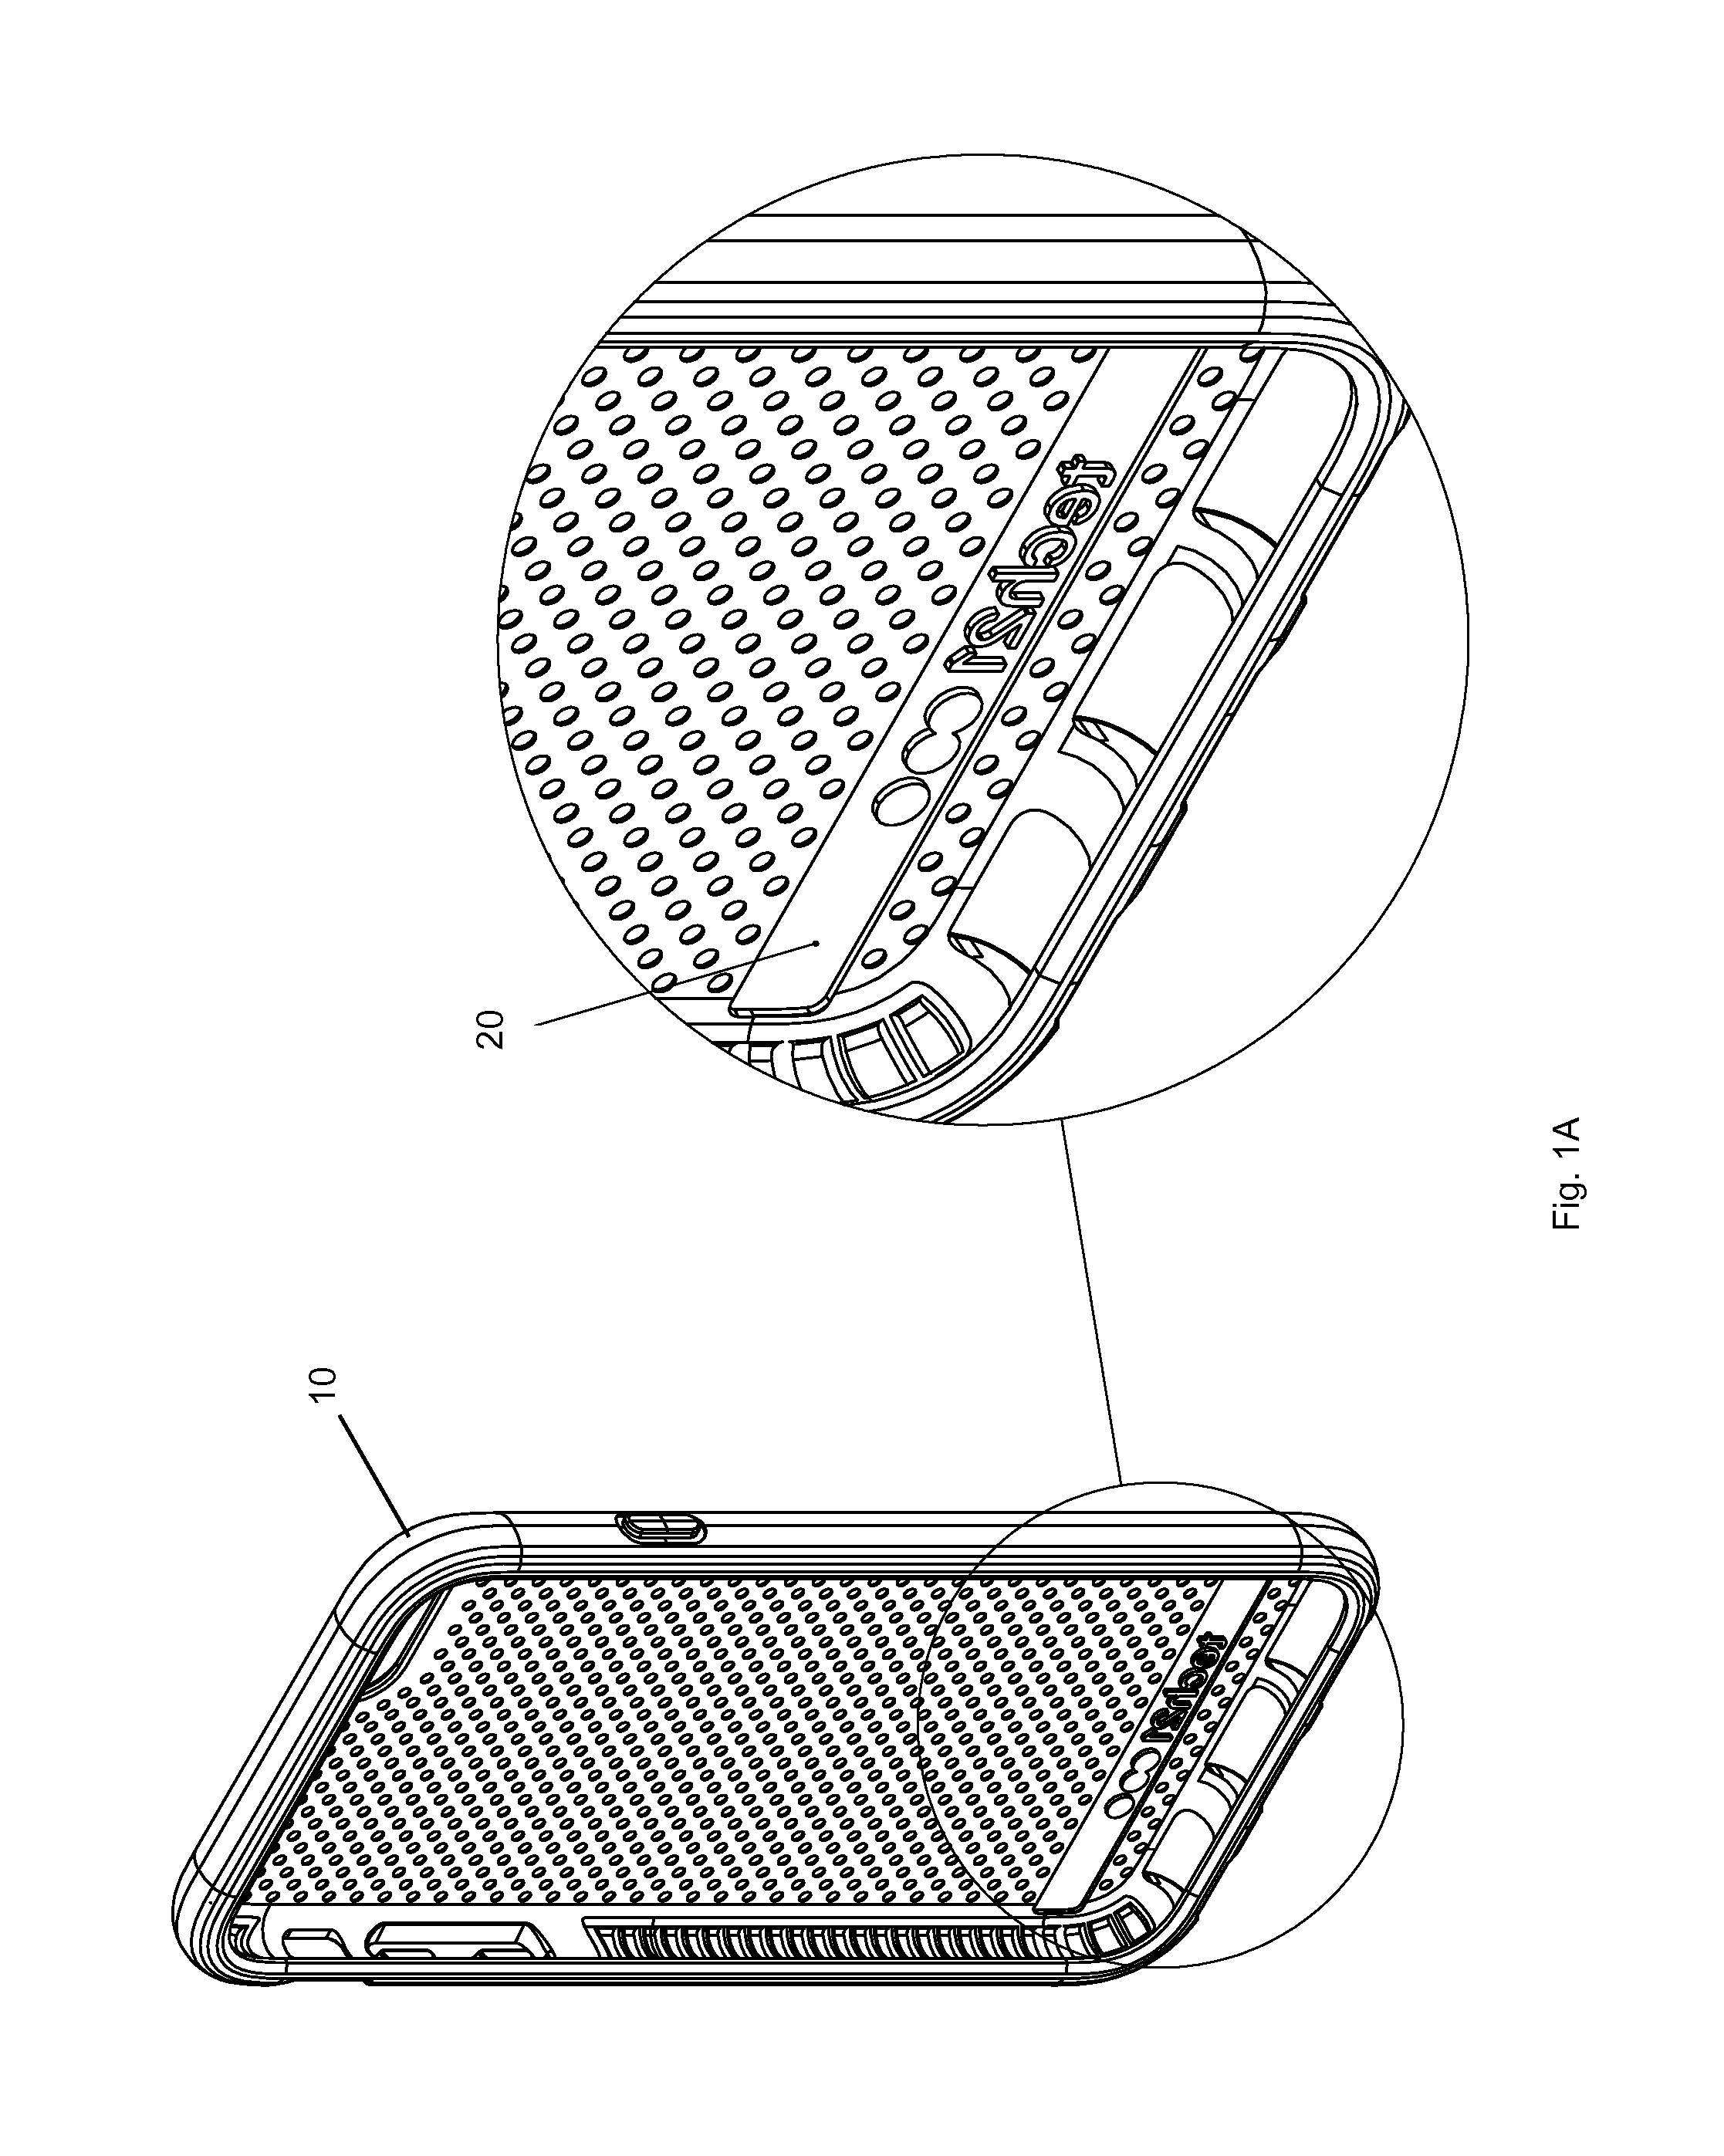 Radio frequency properties of a case for a communications device